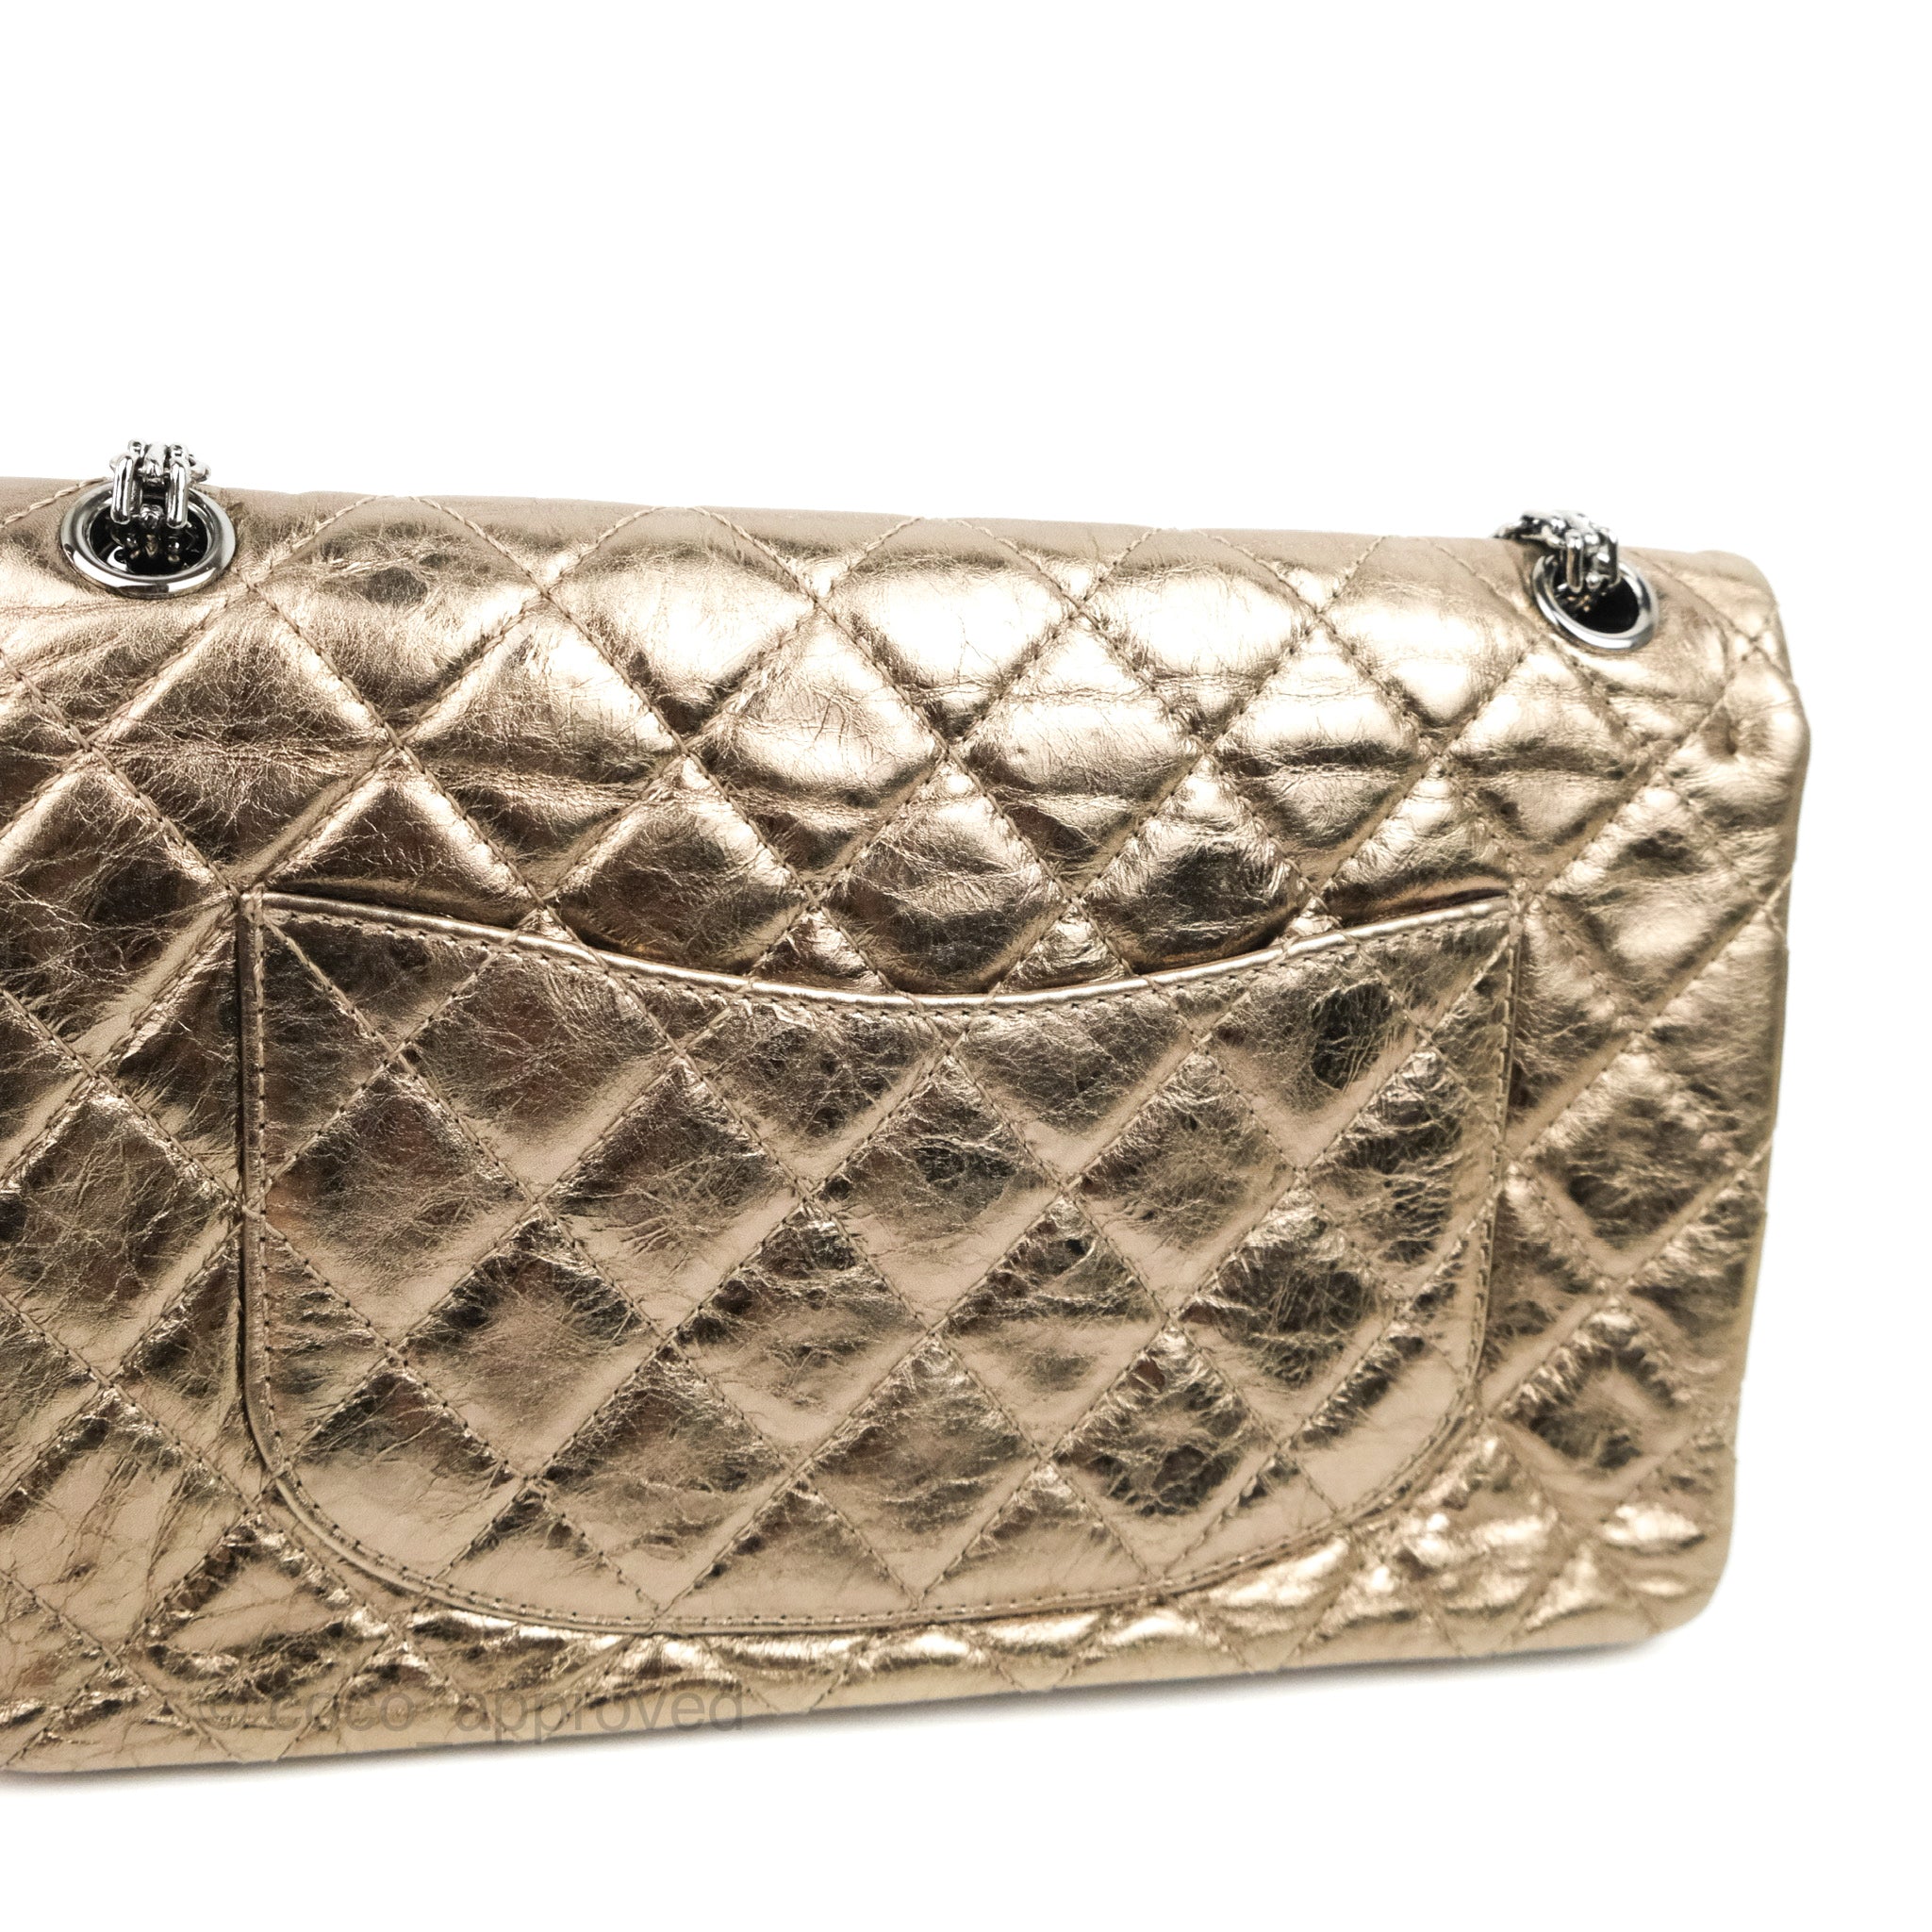 Chanel Metallic Grey/Black Quilted Leather 226 Reissue 2.55 Flap Bag Chanel  | The Luxury Closet